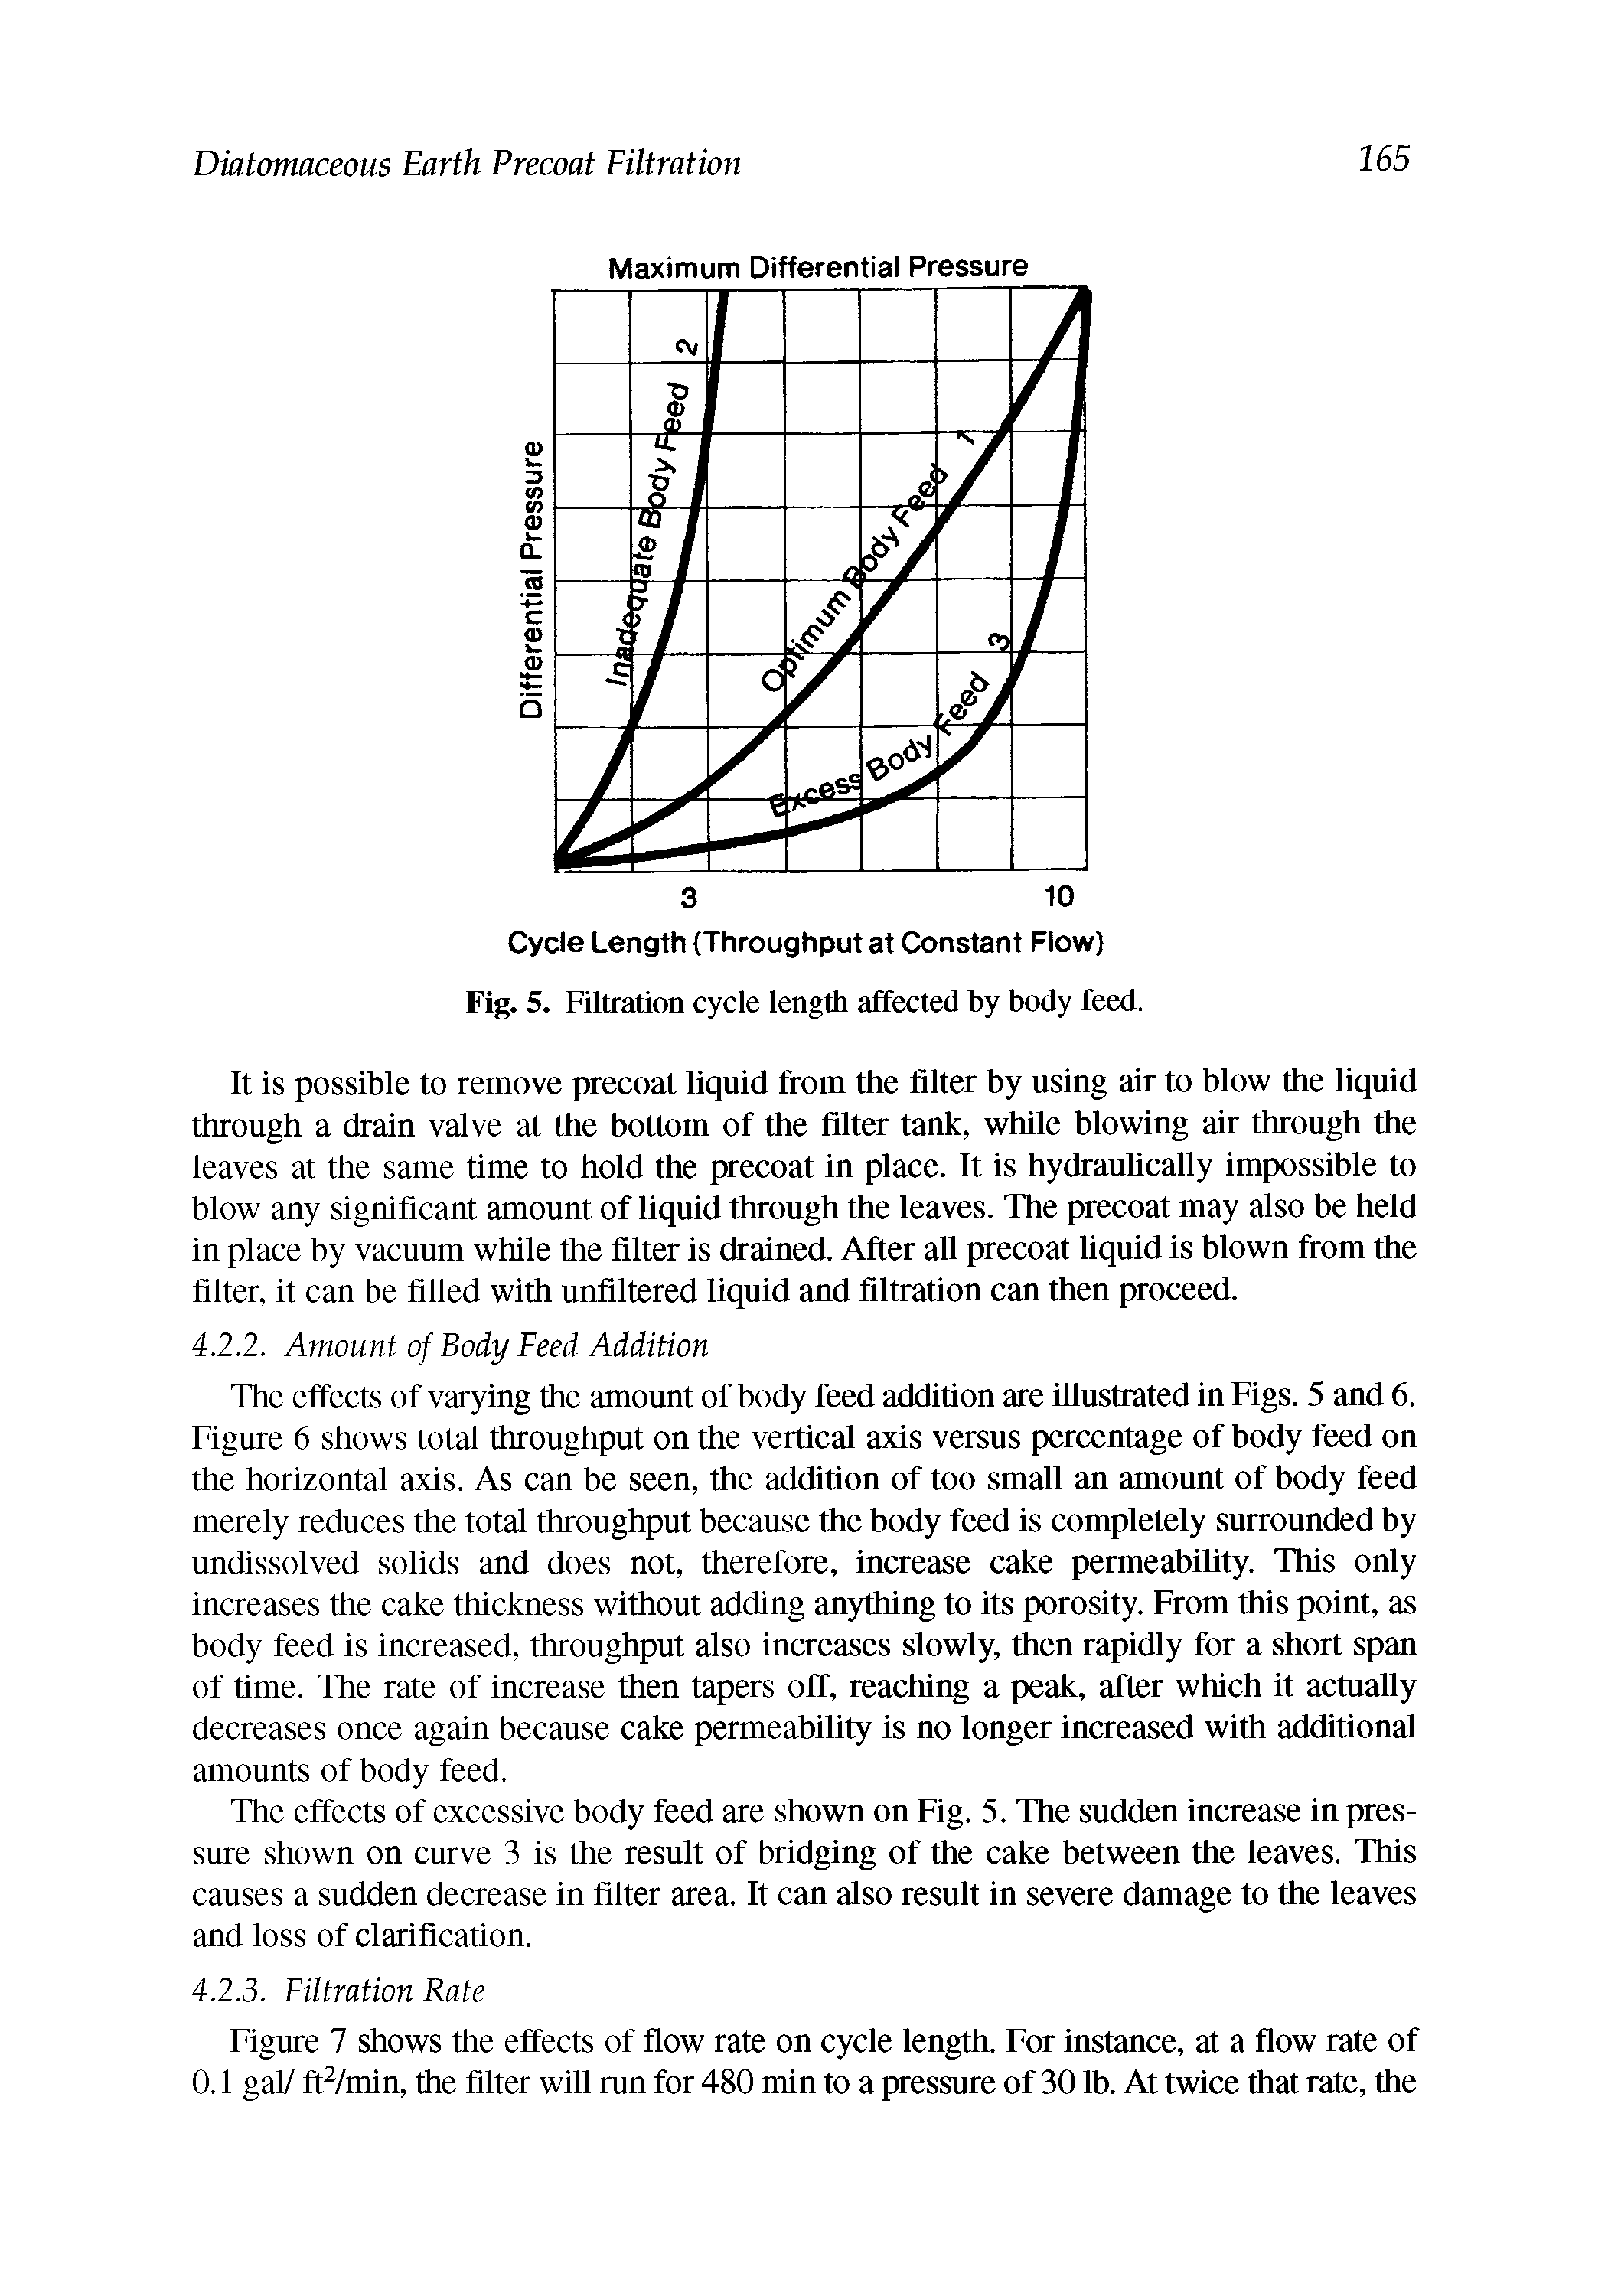 Fig. 5. Filtration cycle length affected by body feed.